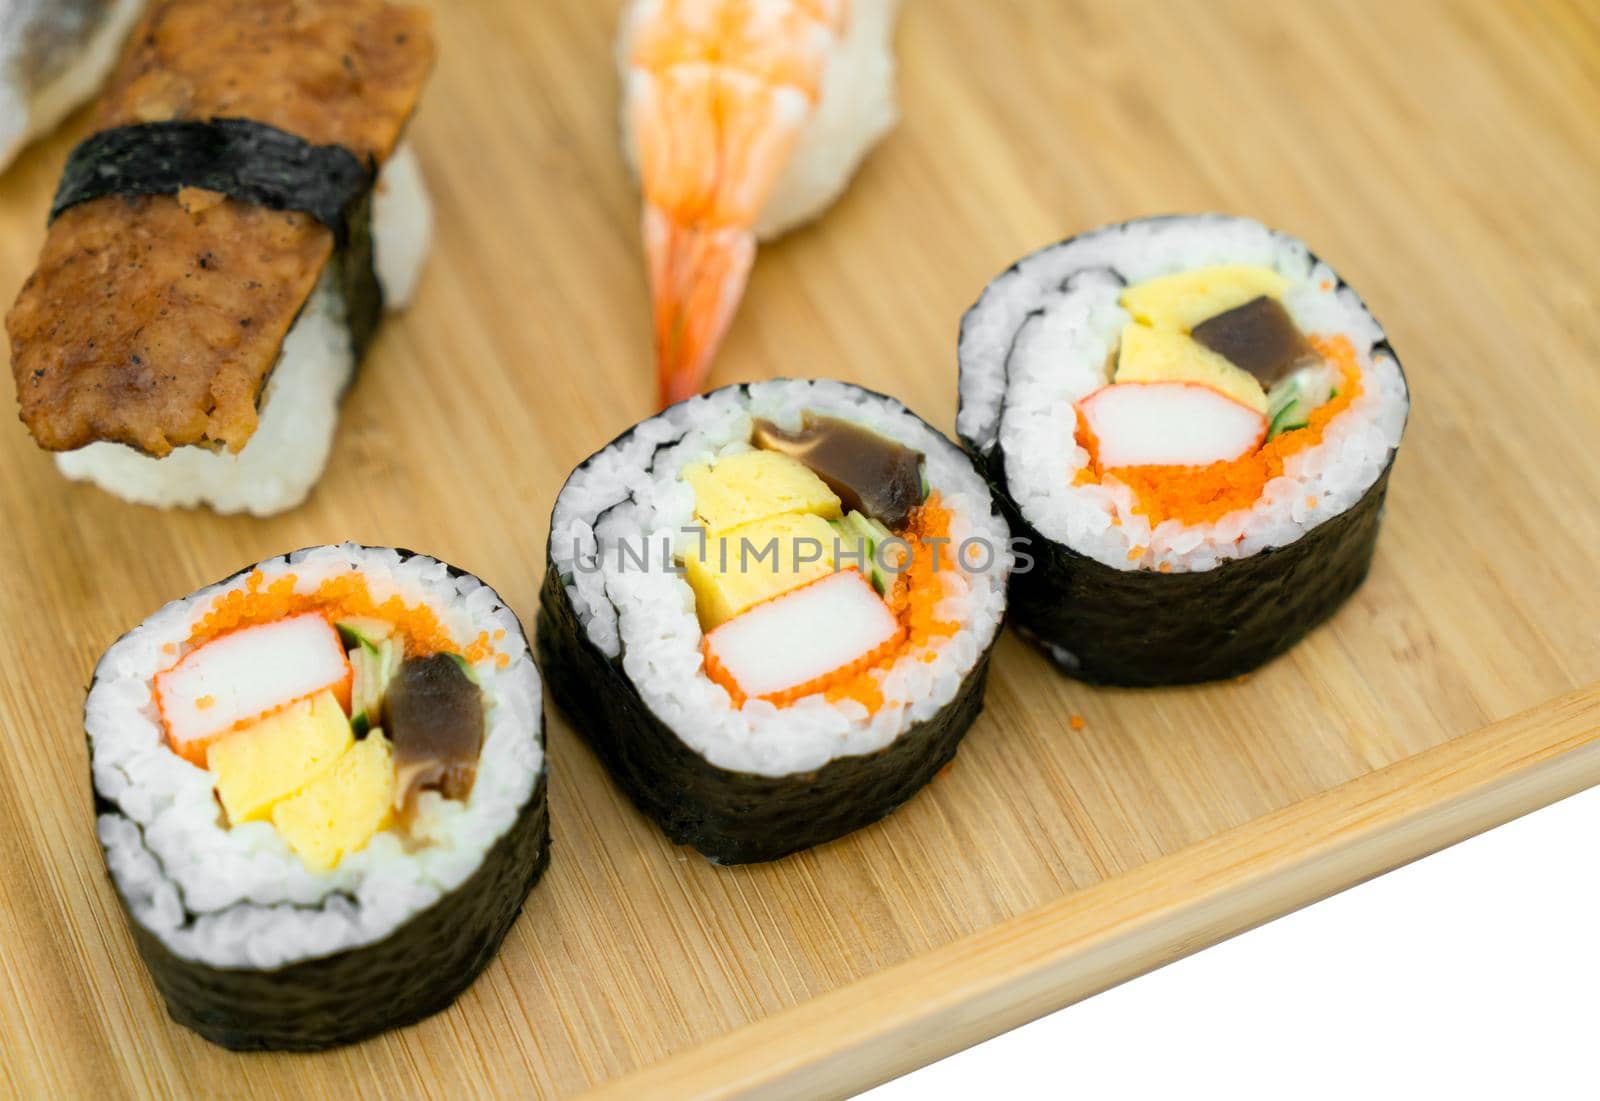 Sushi roll on black background.  Japan food concept by Buttus_casso